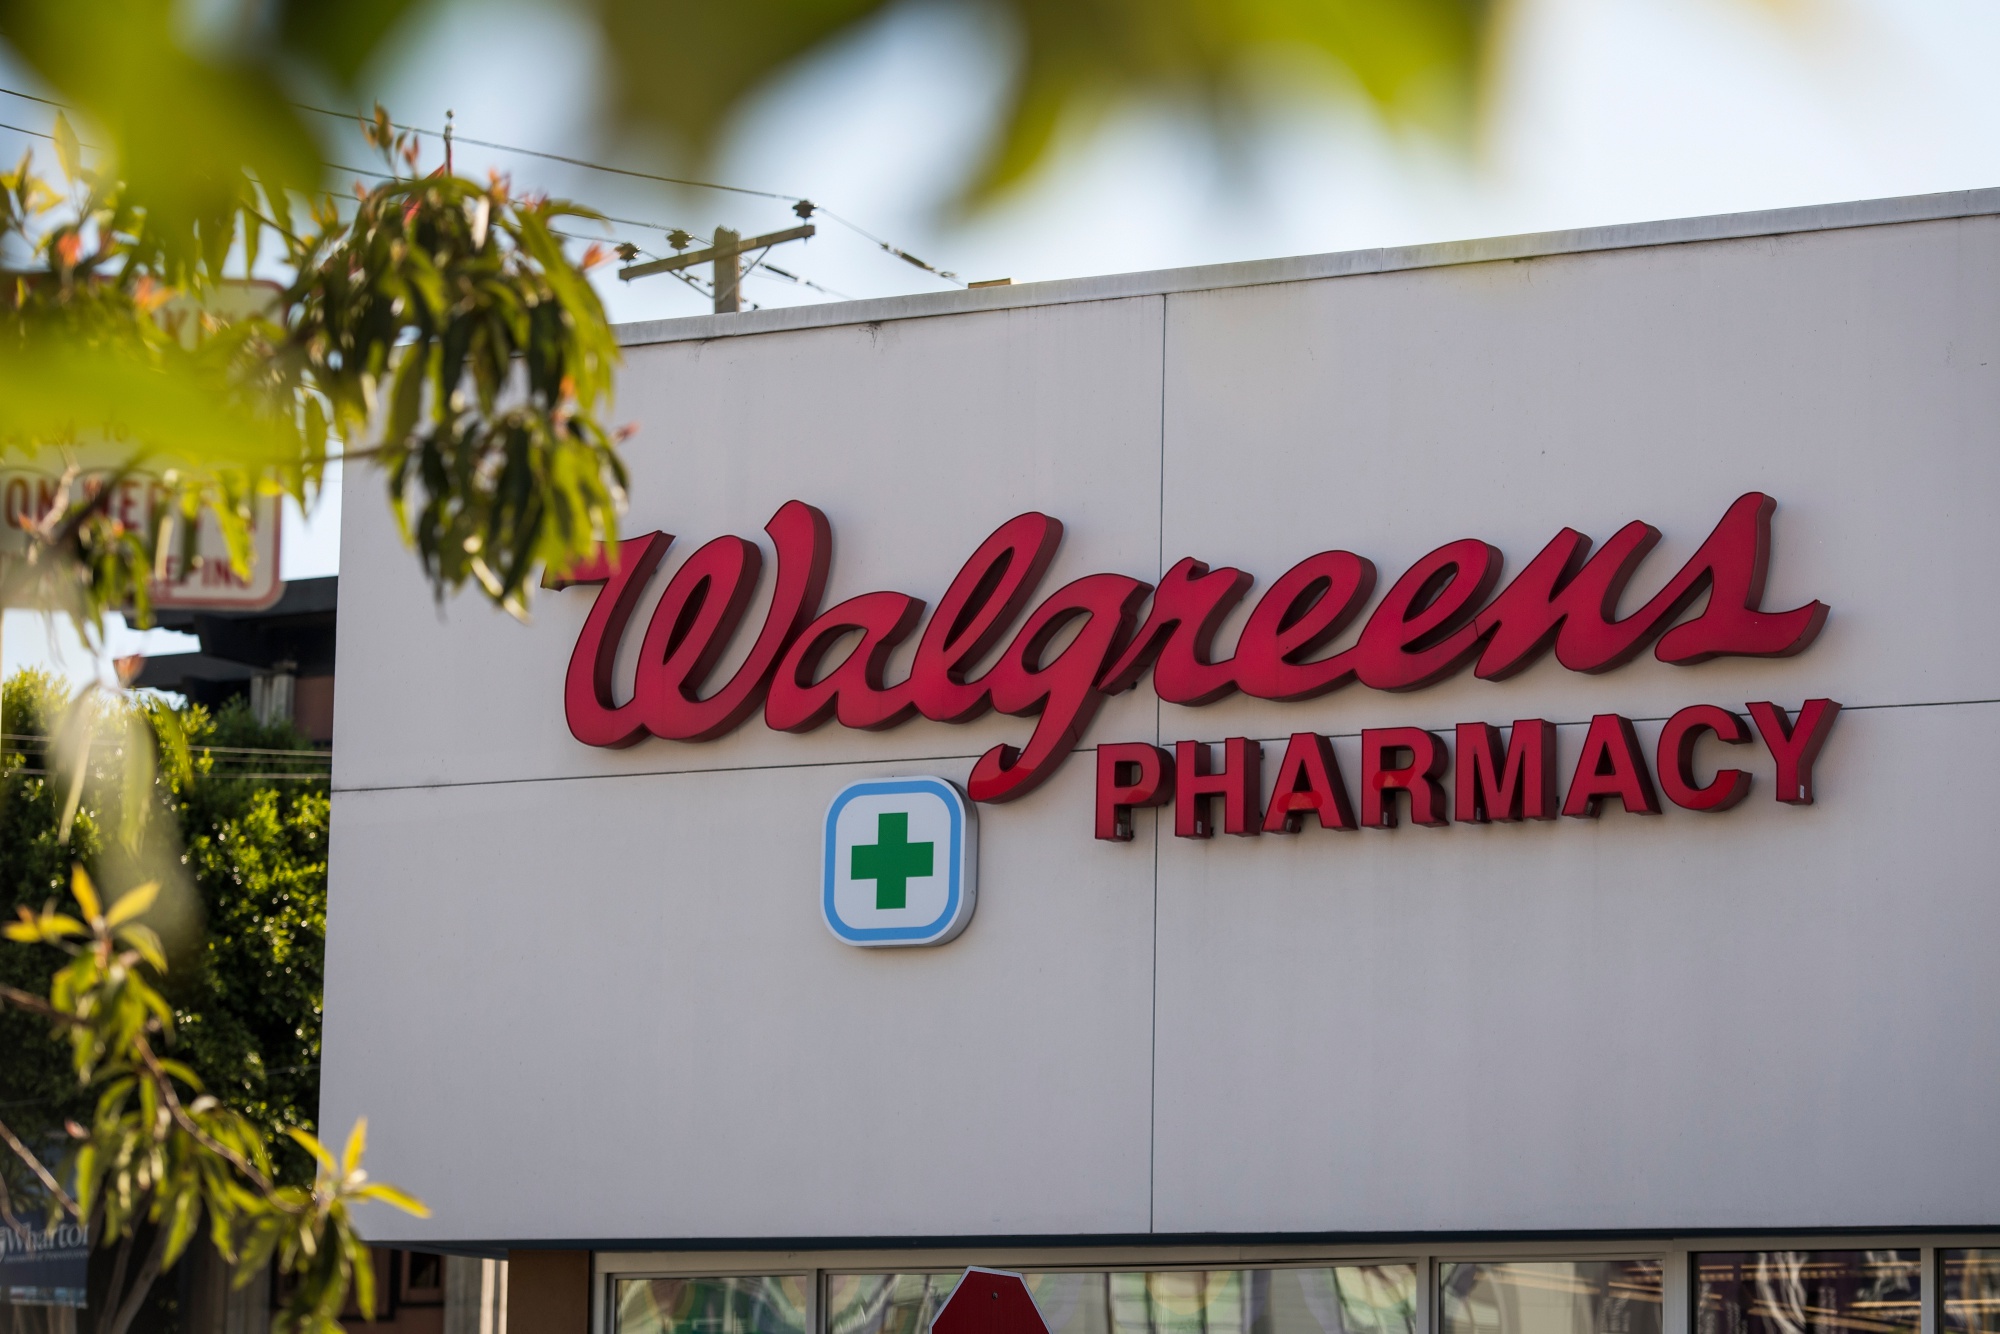 Looting on the Rise, San Francisco Walgreens Forced To Close As